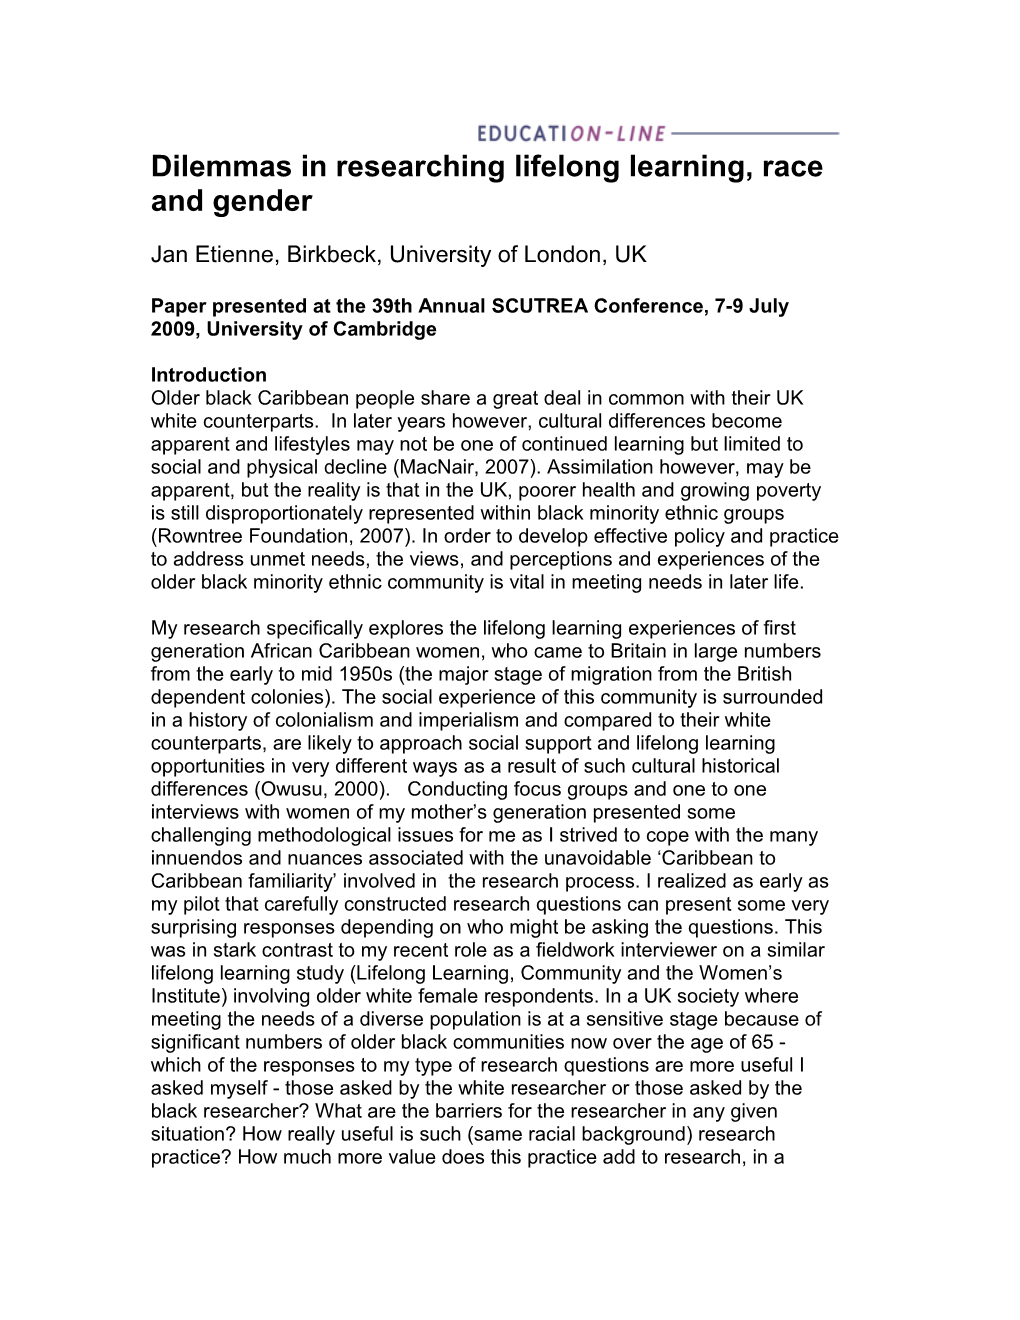 Dilemmas in Researching Lifelong Learning, Race and Gender